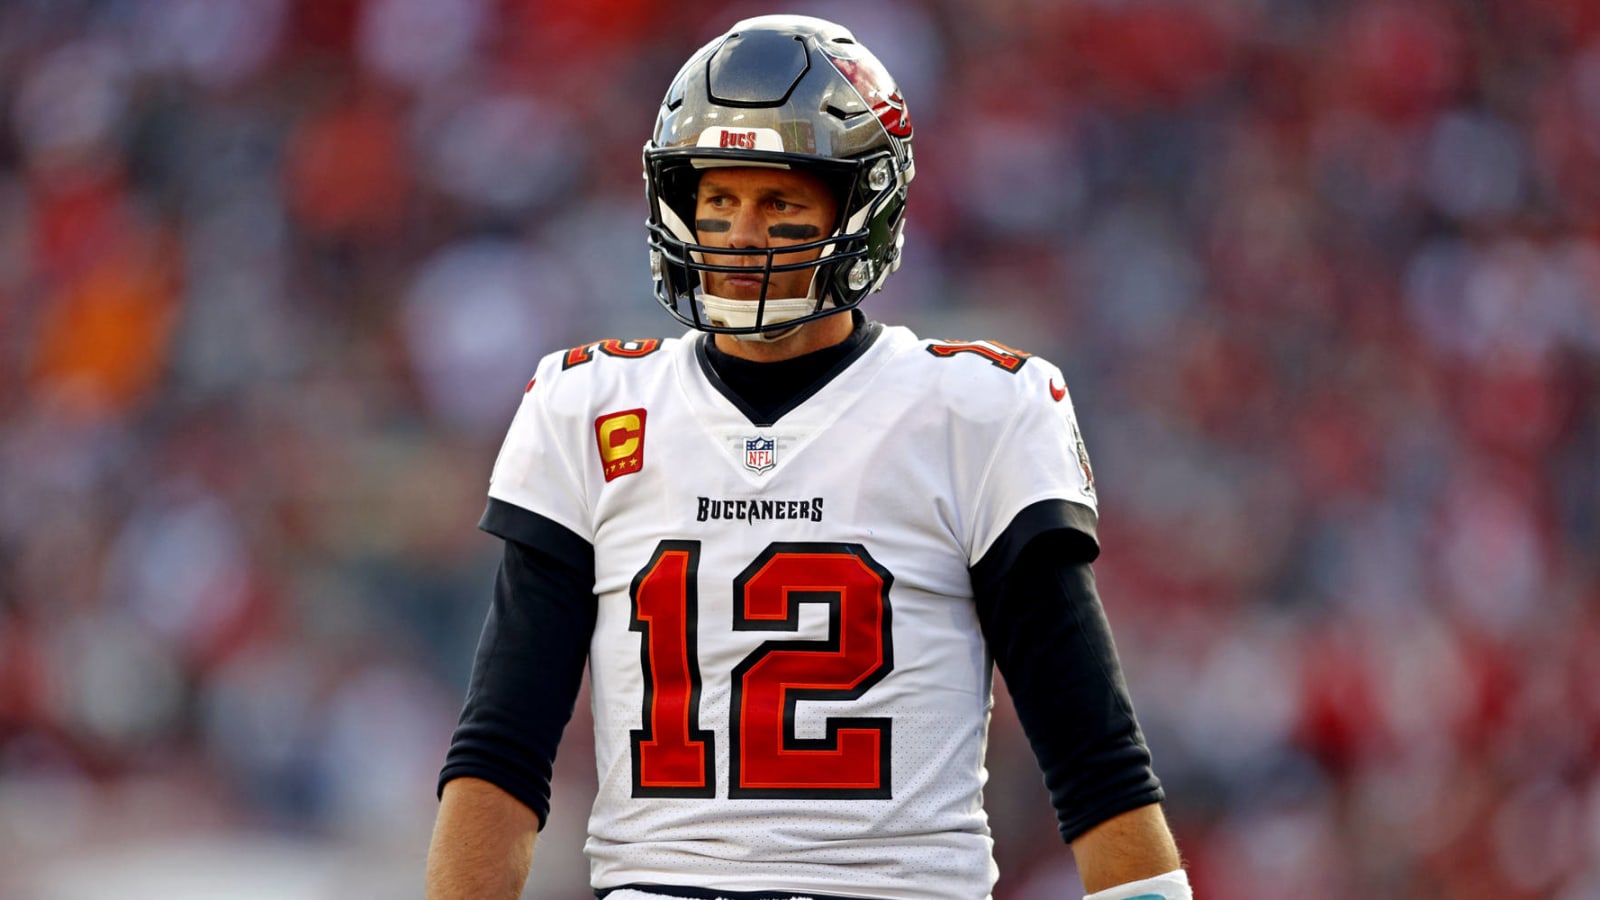 Tom Brady uncertain about future after Bucs' playoff exit